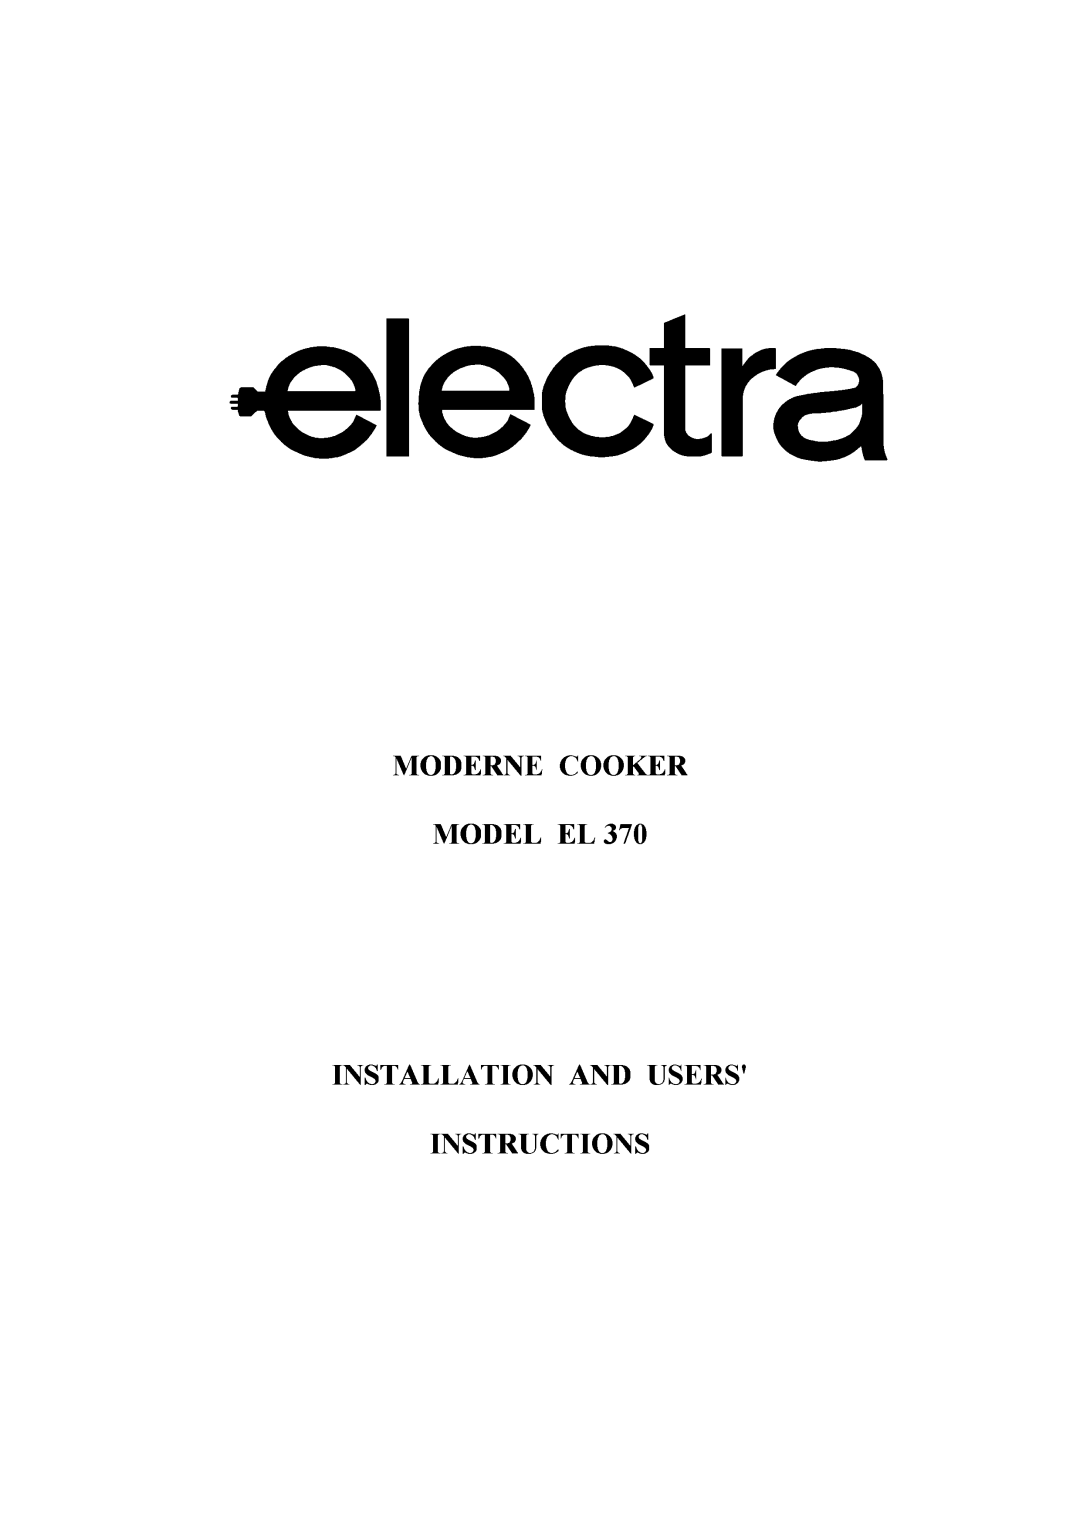 Electra Accessories EL 370 manual INSTALLAMODERNEINSTRUCTIONSMODELELCOOKERAND370USERS 